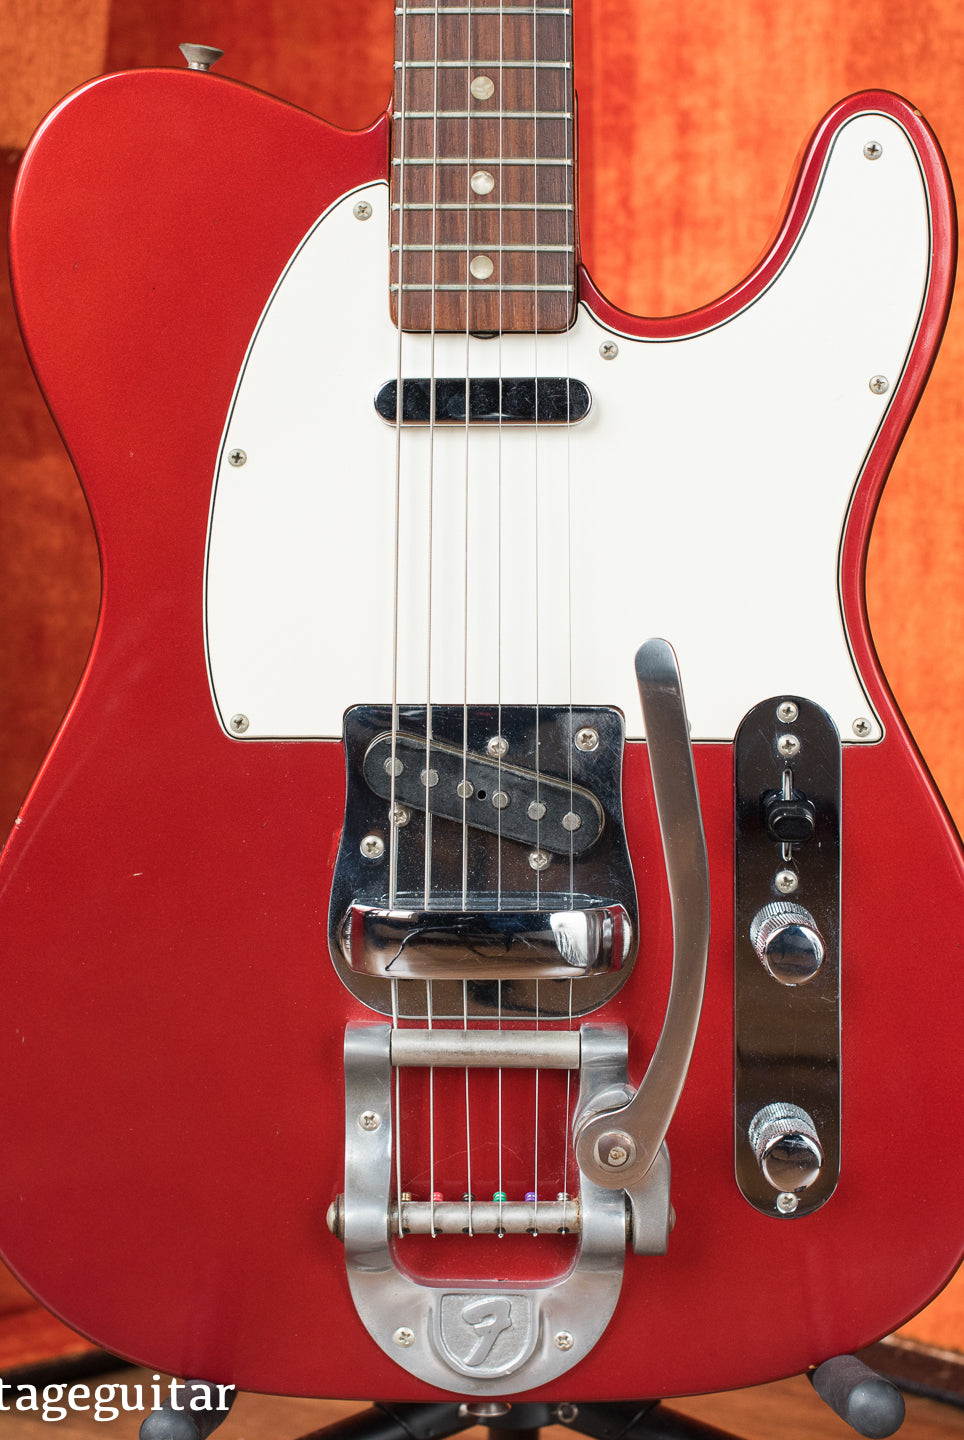 Vintage 1968 Fender Telecaster Candy Apple Red Metallic Bigsby electric guitar